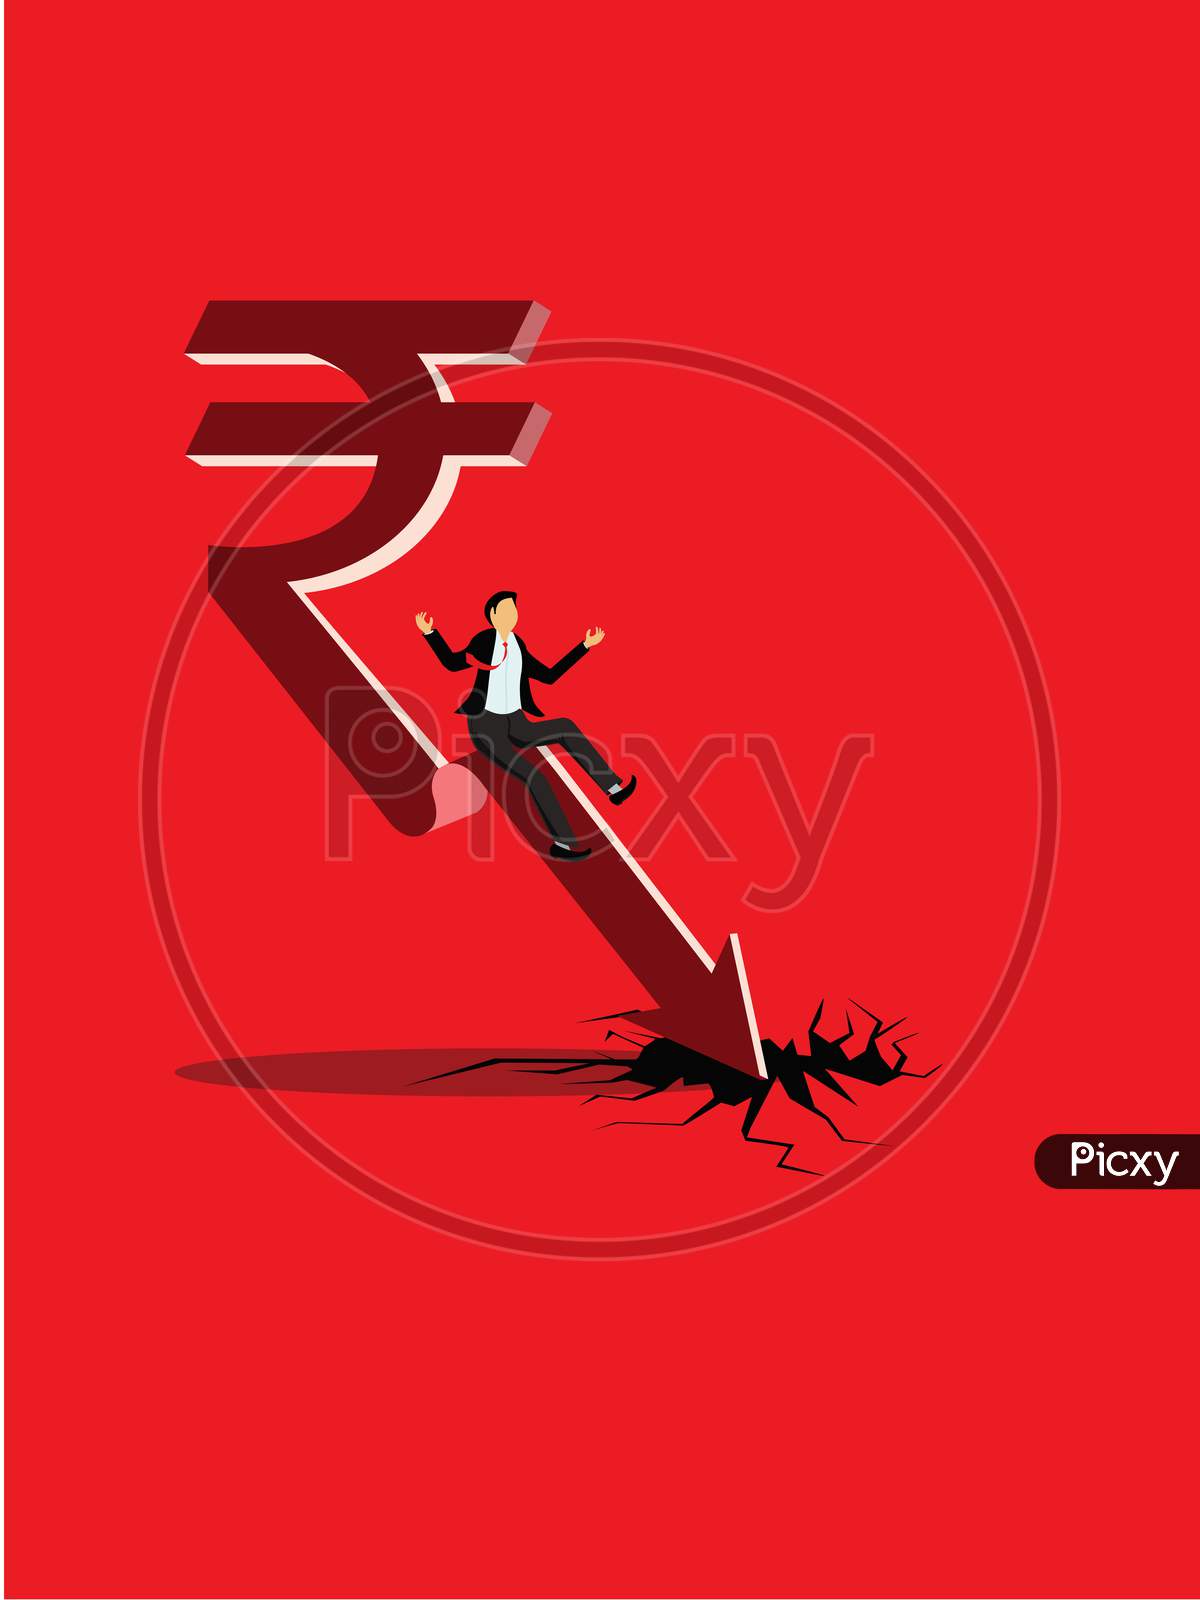 Downward growth arrow rupee symbol sign. Economic recession concept Indian currency sign.